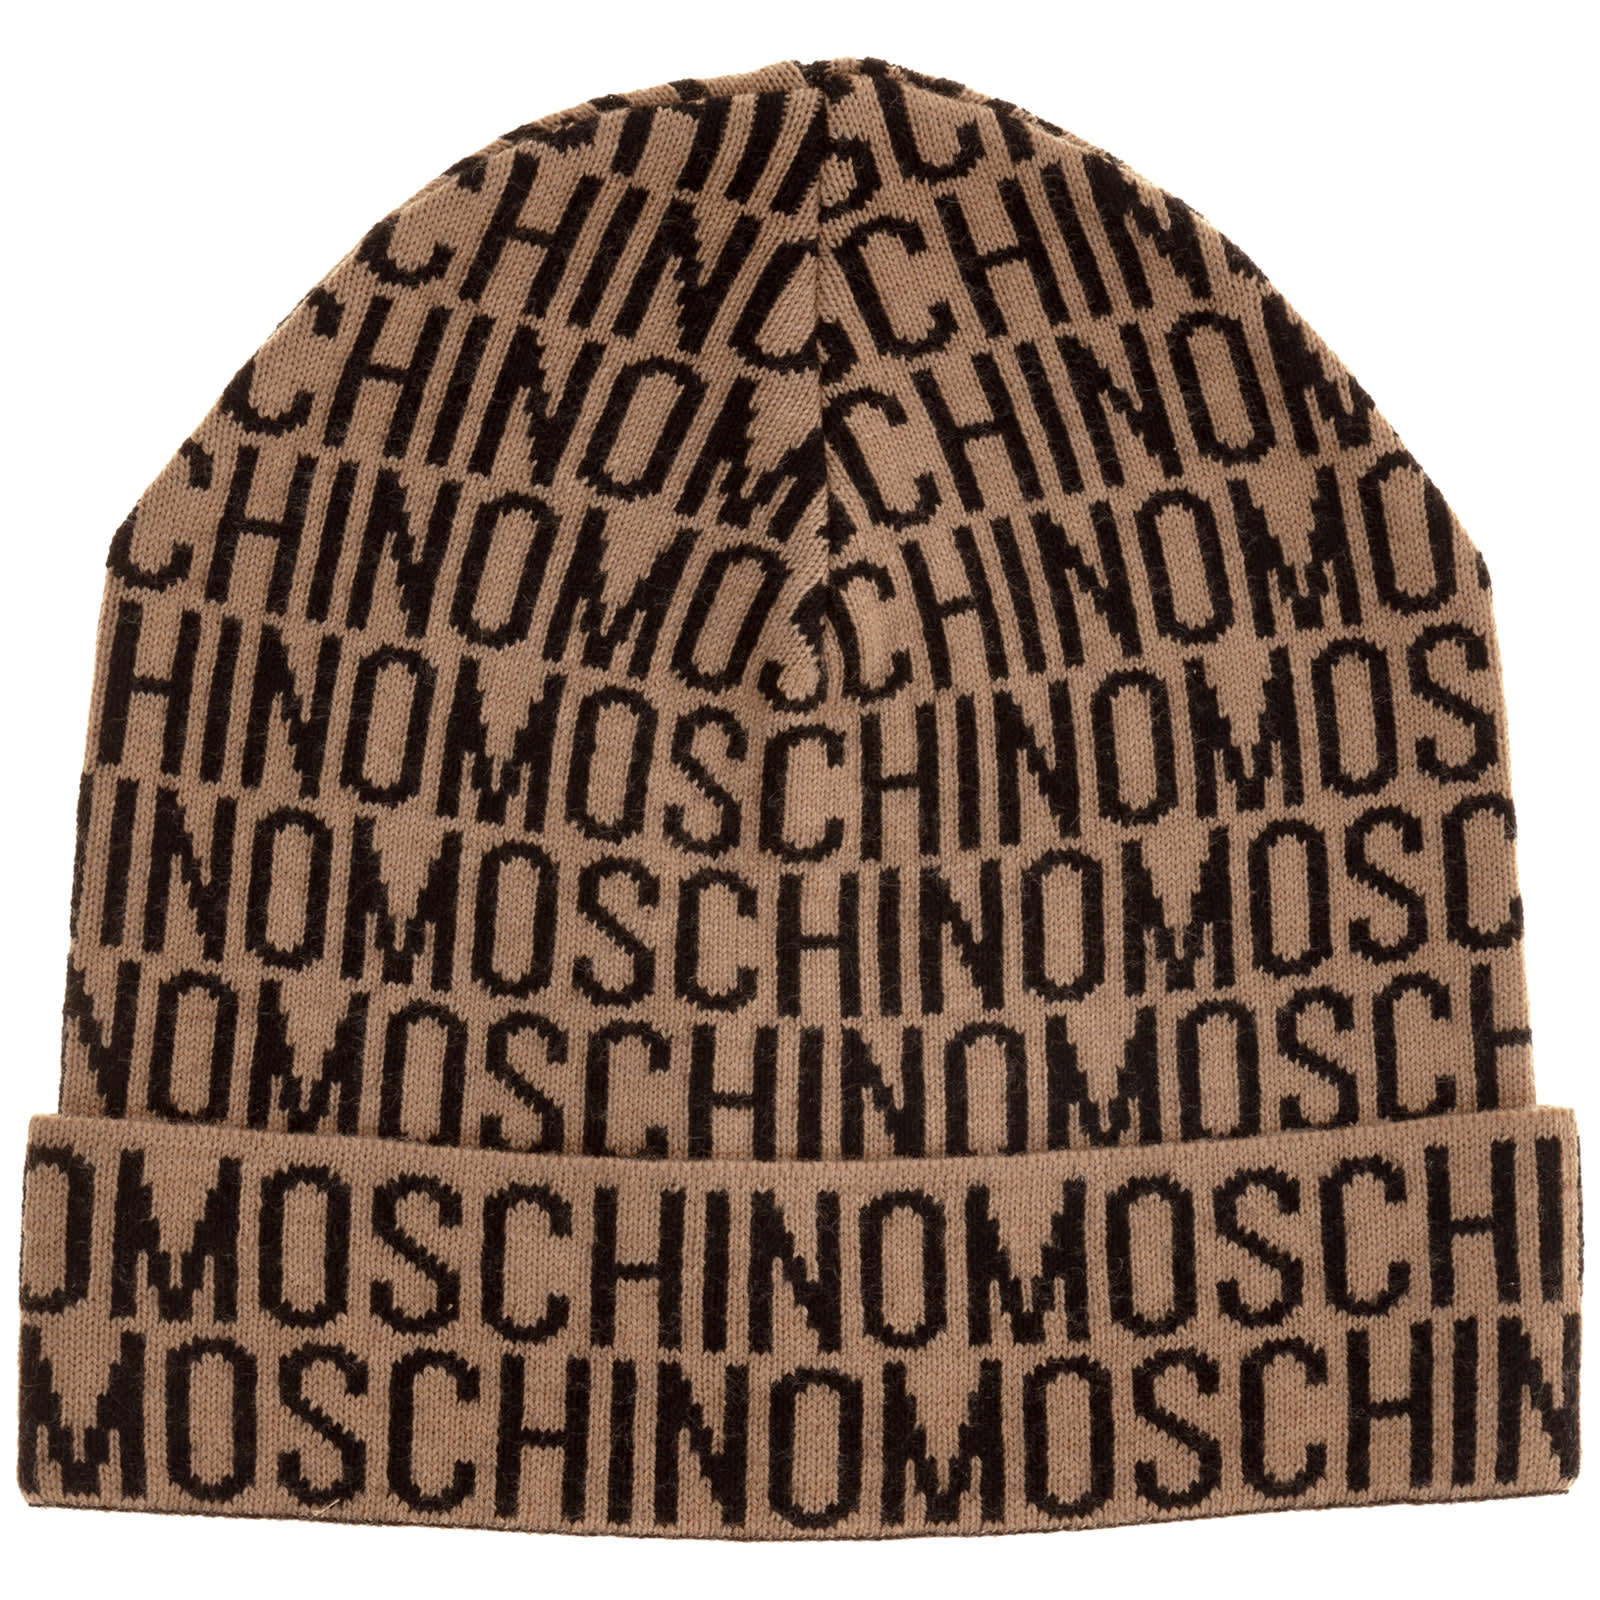 MOSCHINO DOUBLE QUESTION MARK BEANIE,M513960007031